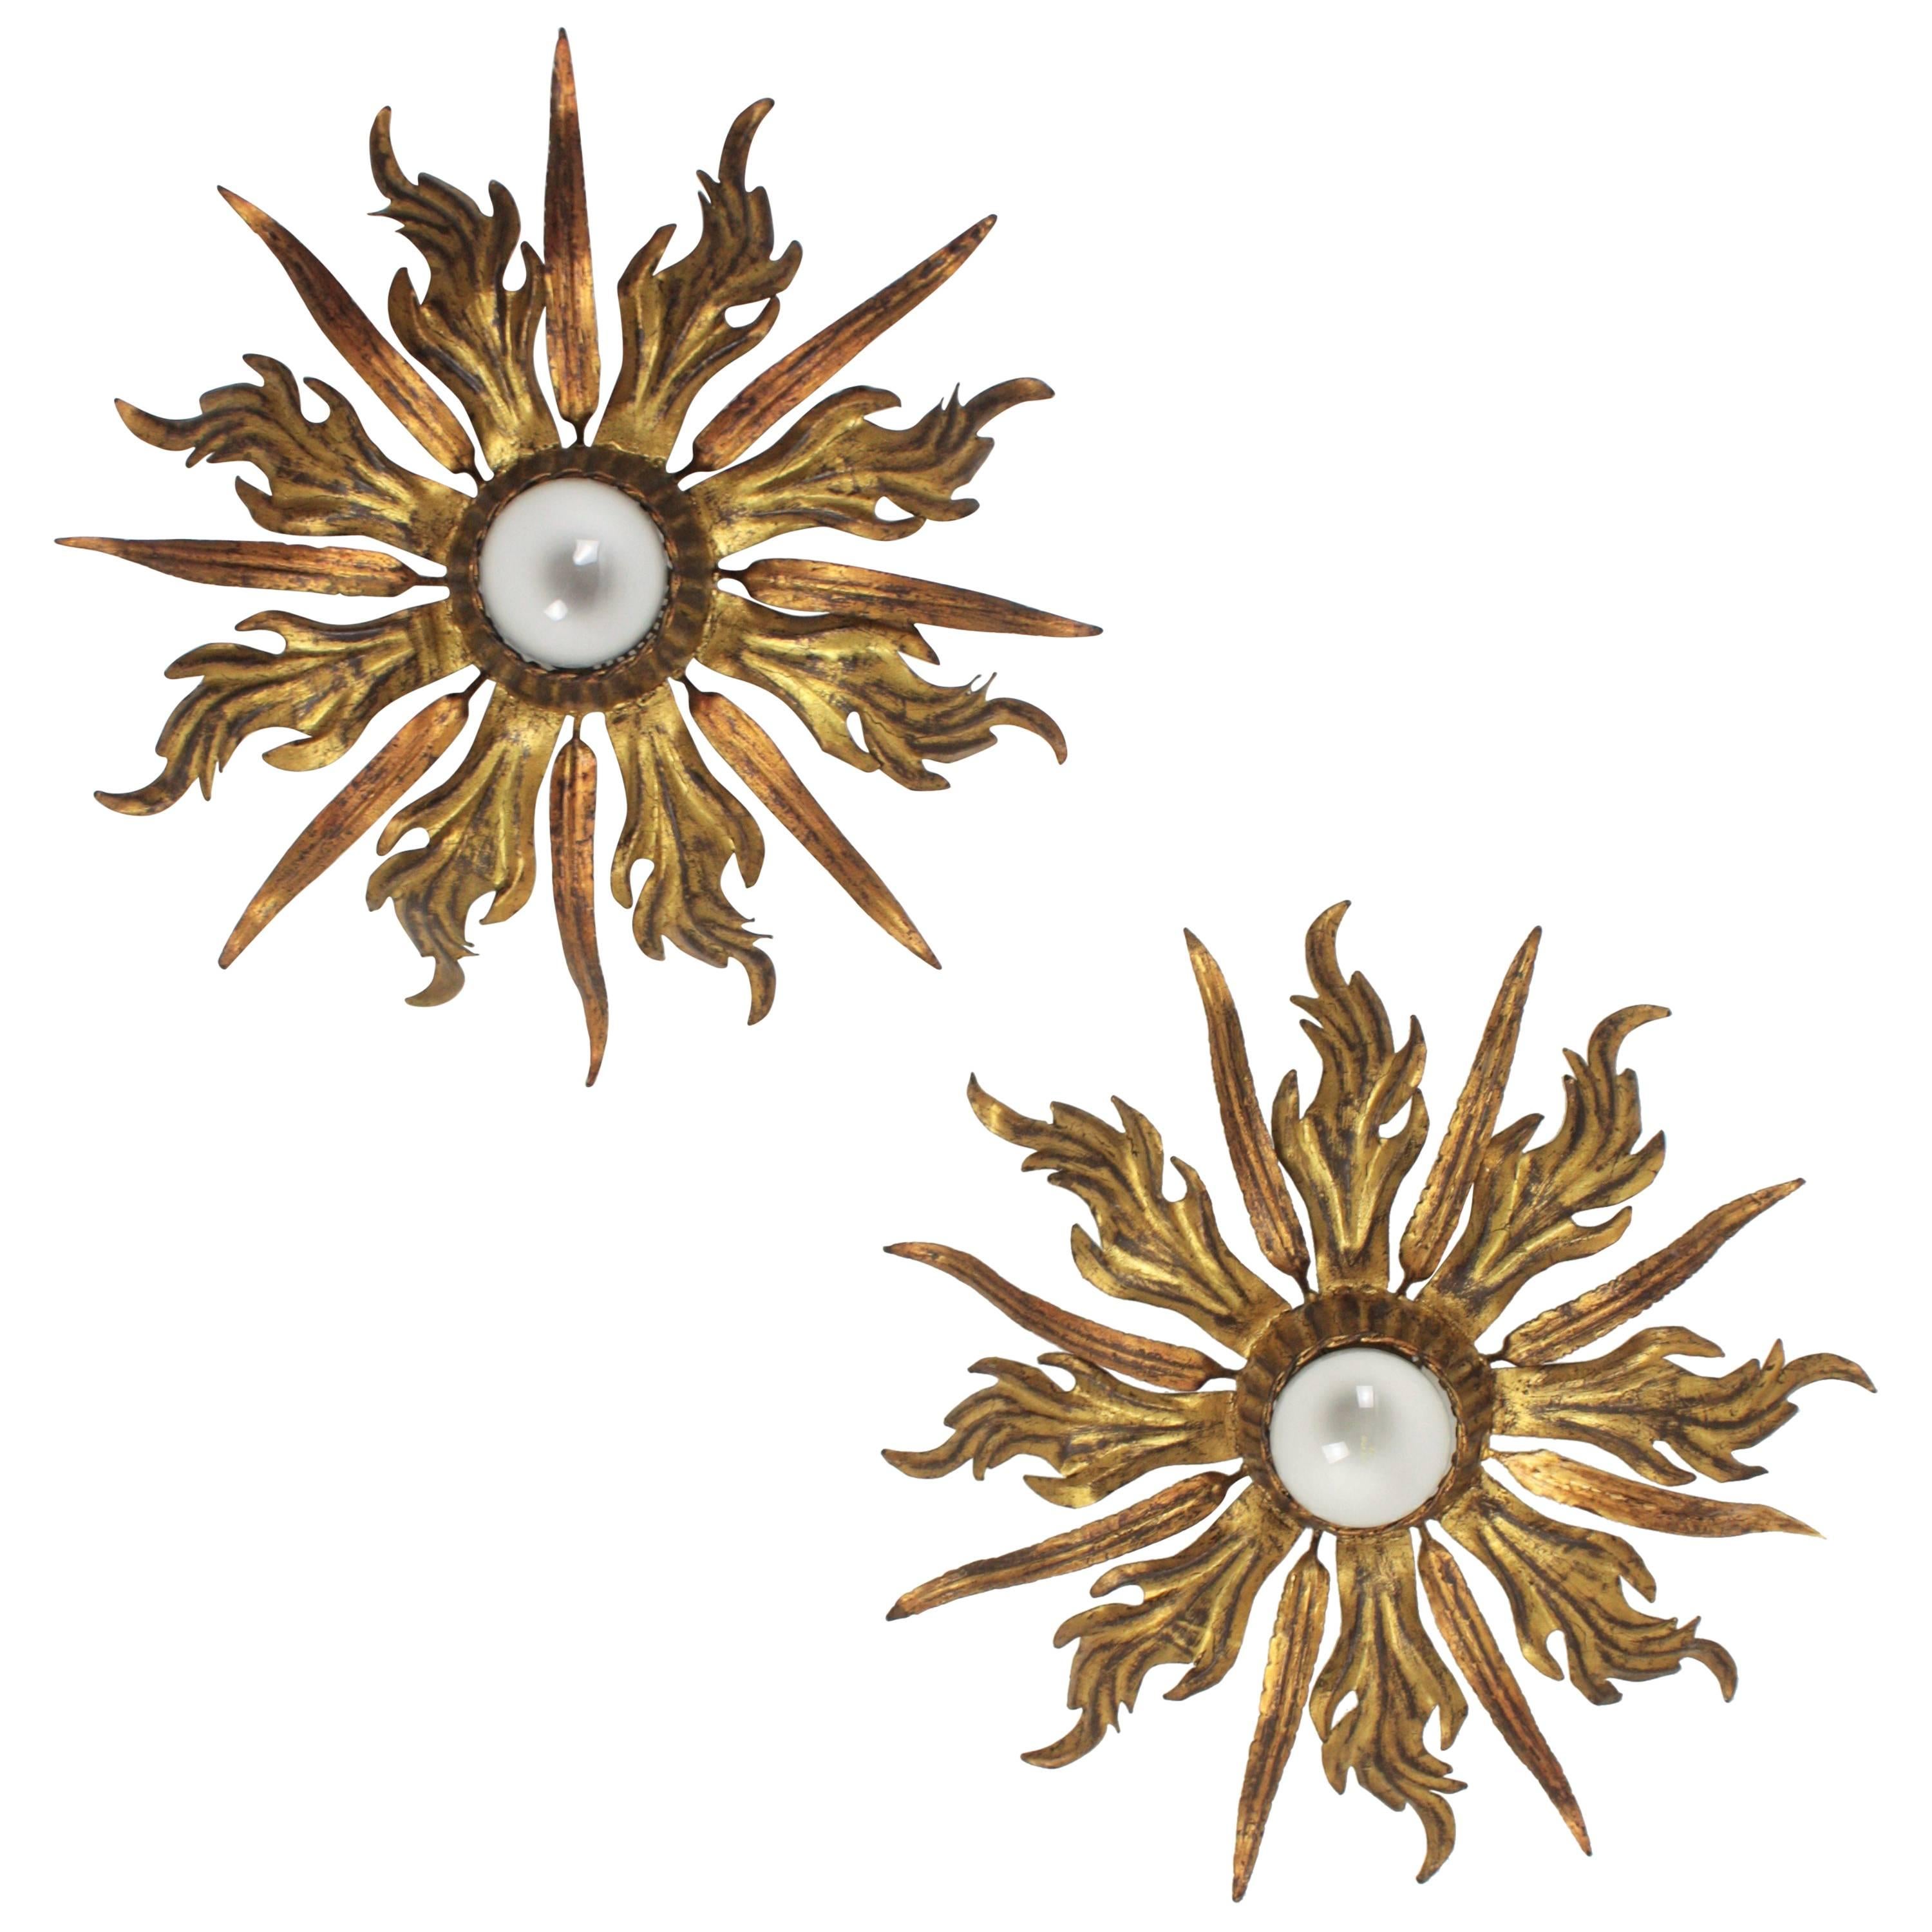 French 1930s Pair of Leafed Copper & Gilt Iron Sunburst Ceiling or Wall Sconces